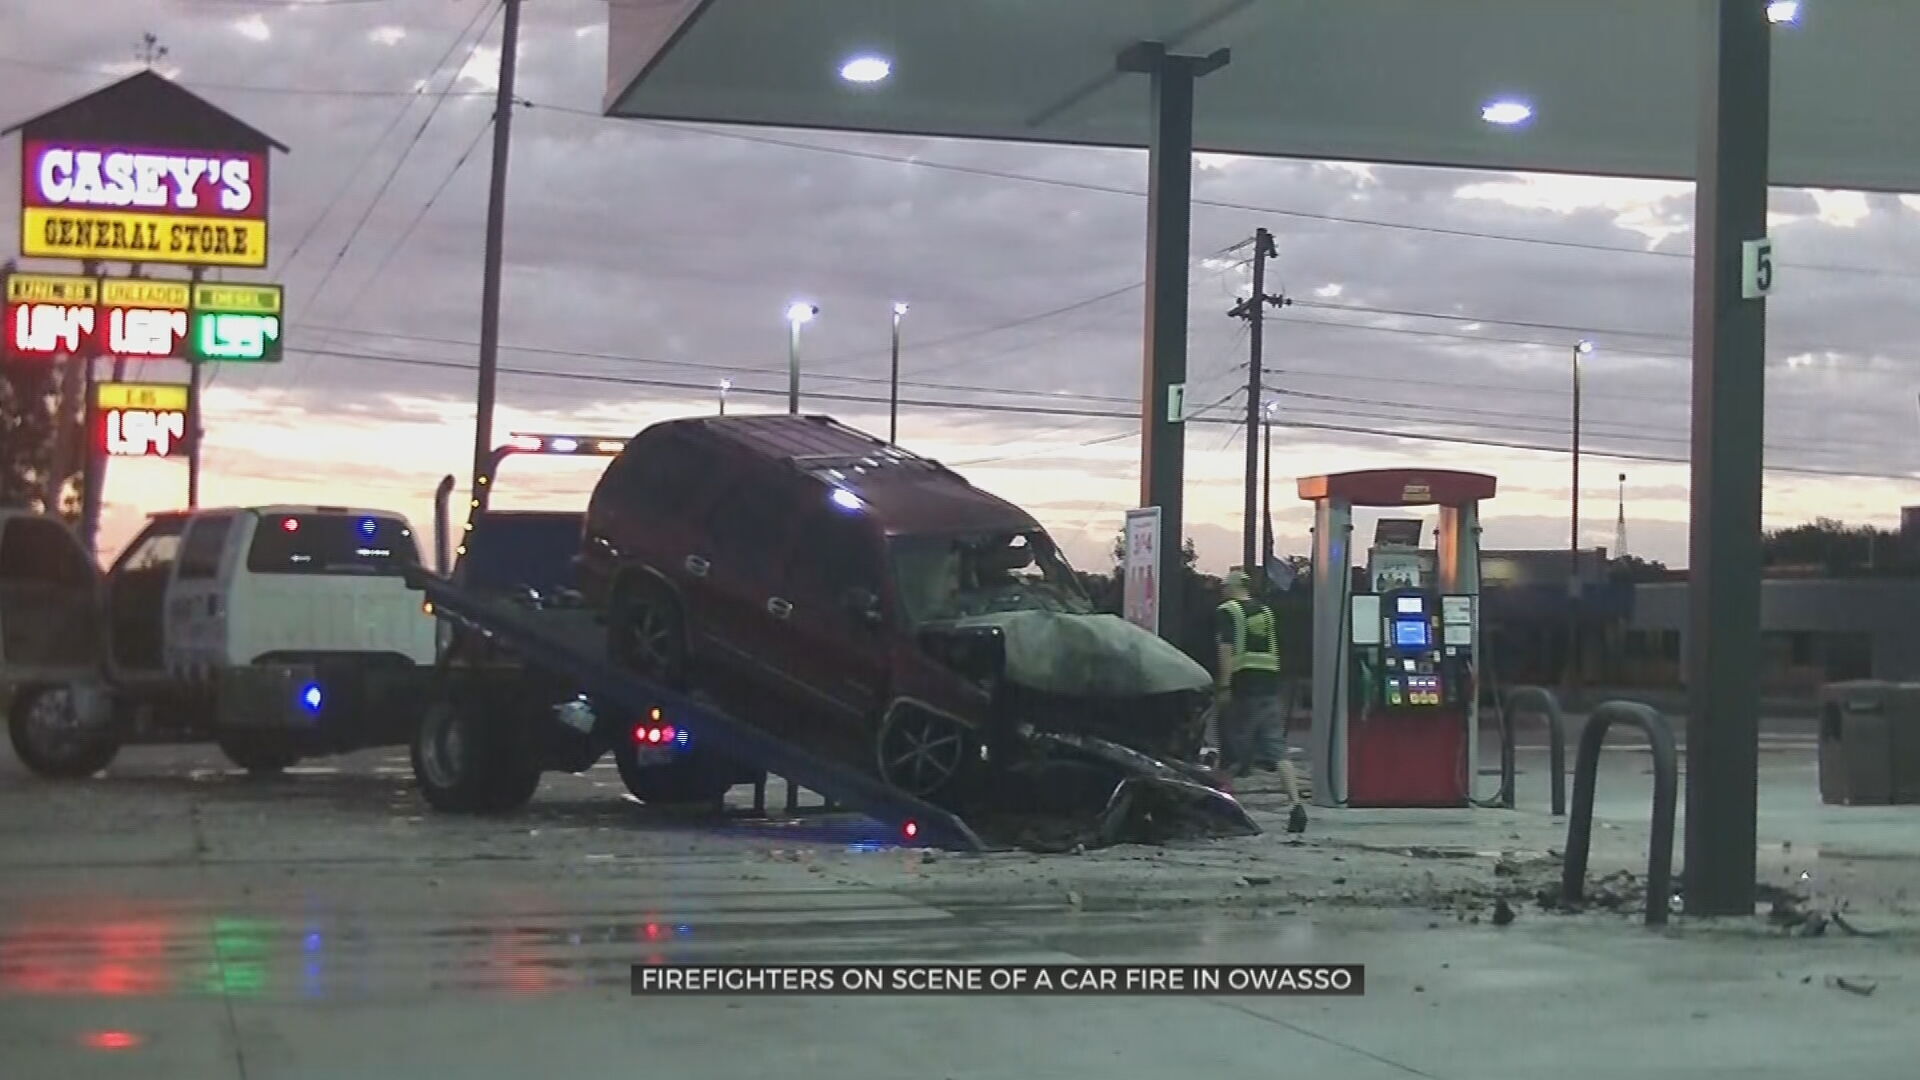 Police Chase Ends With Car Fire At Owasso Casey's Convenience Store